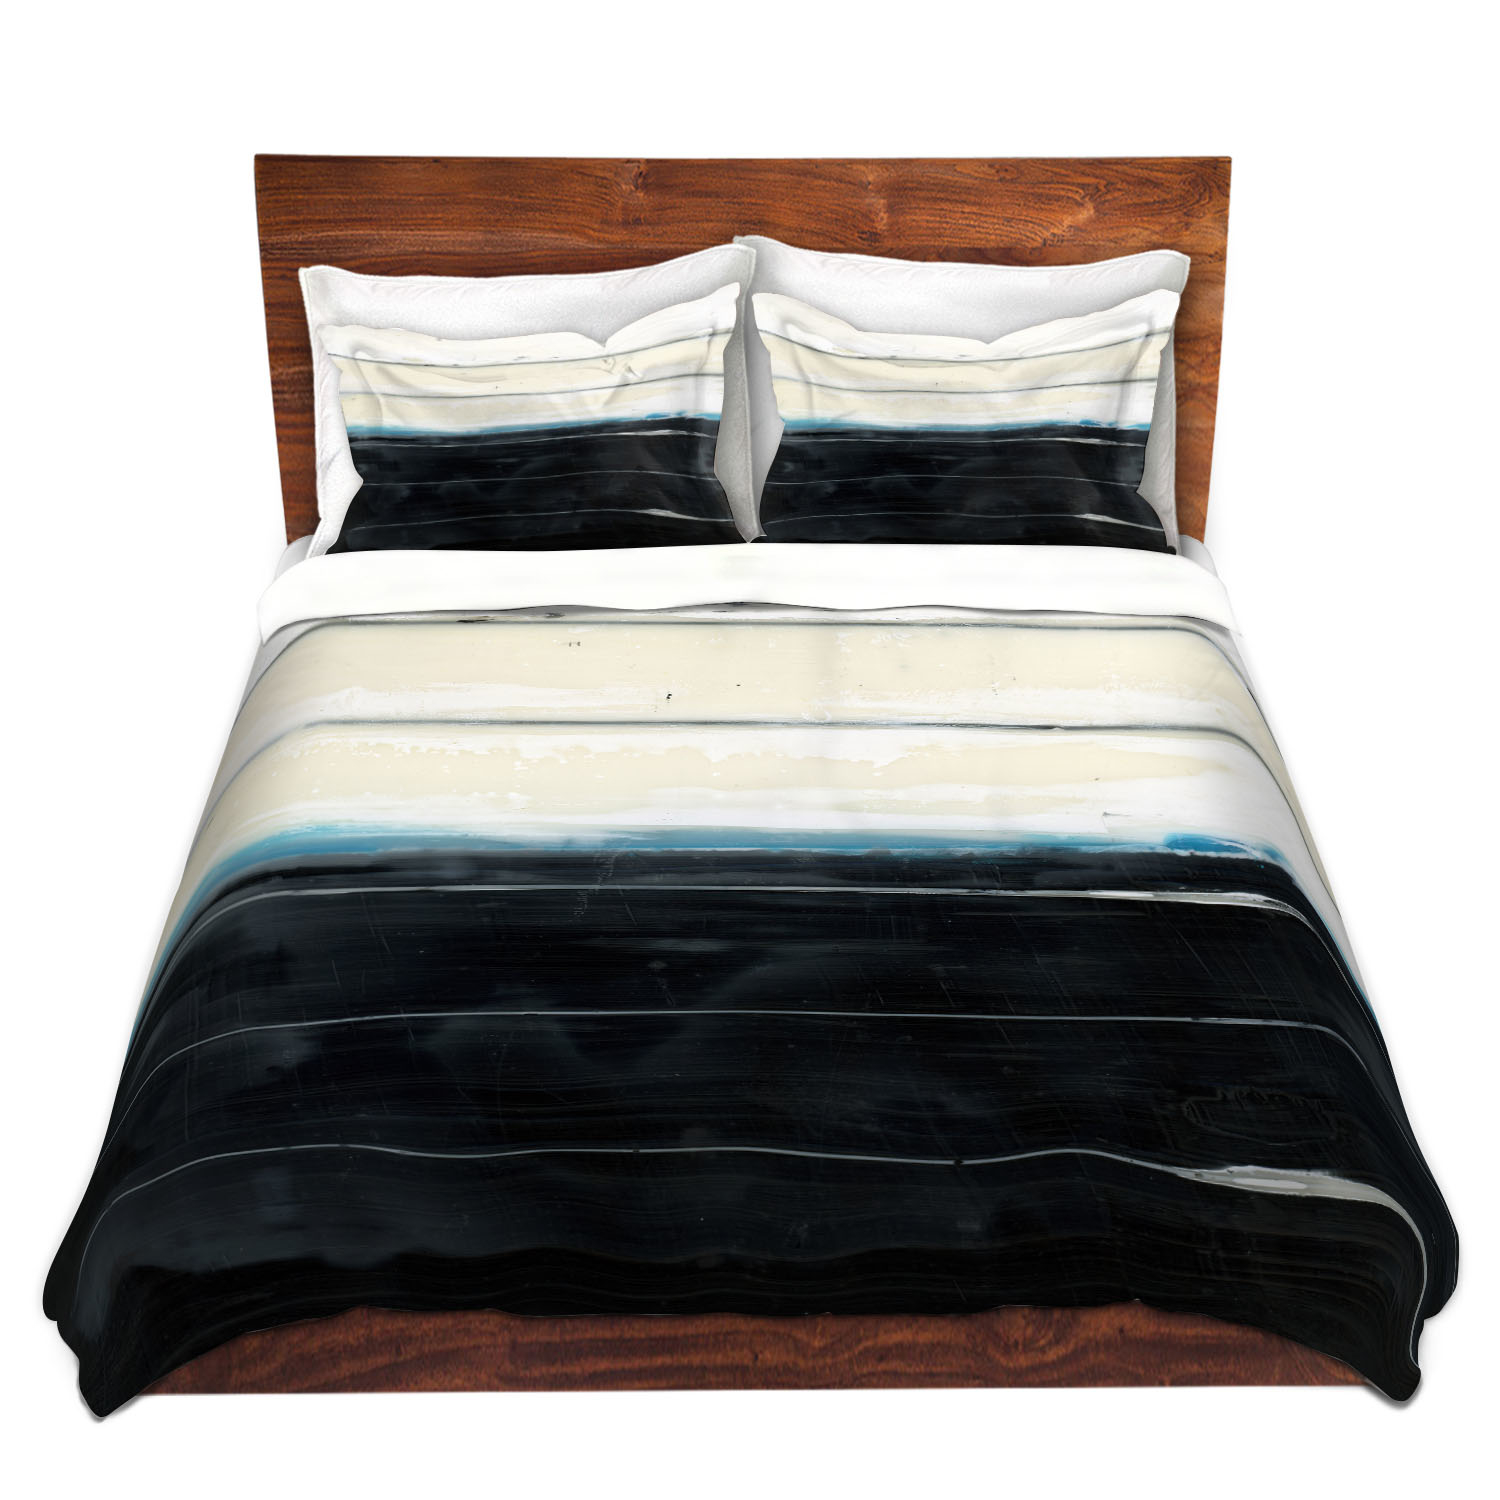 Dianoche Microfiber Duvet Covers By Dora Ficher - Not Always Black Or White 3